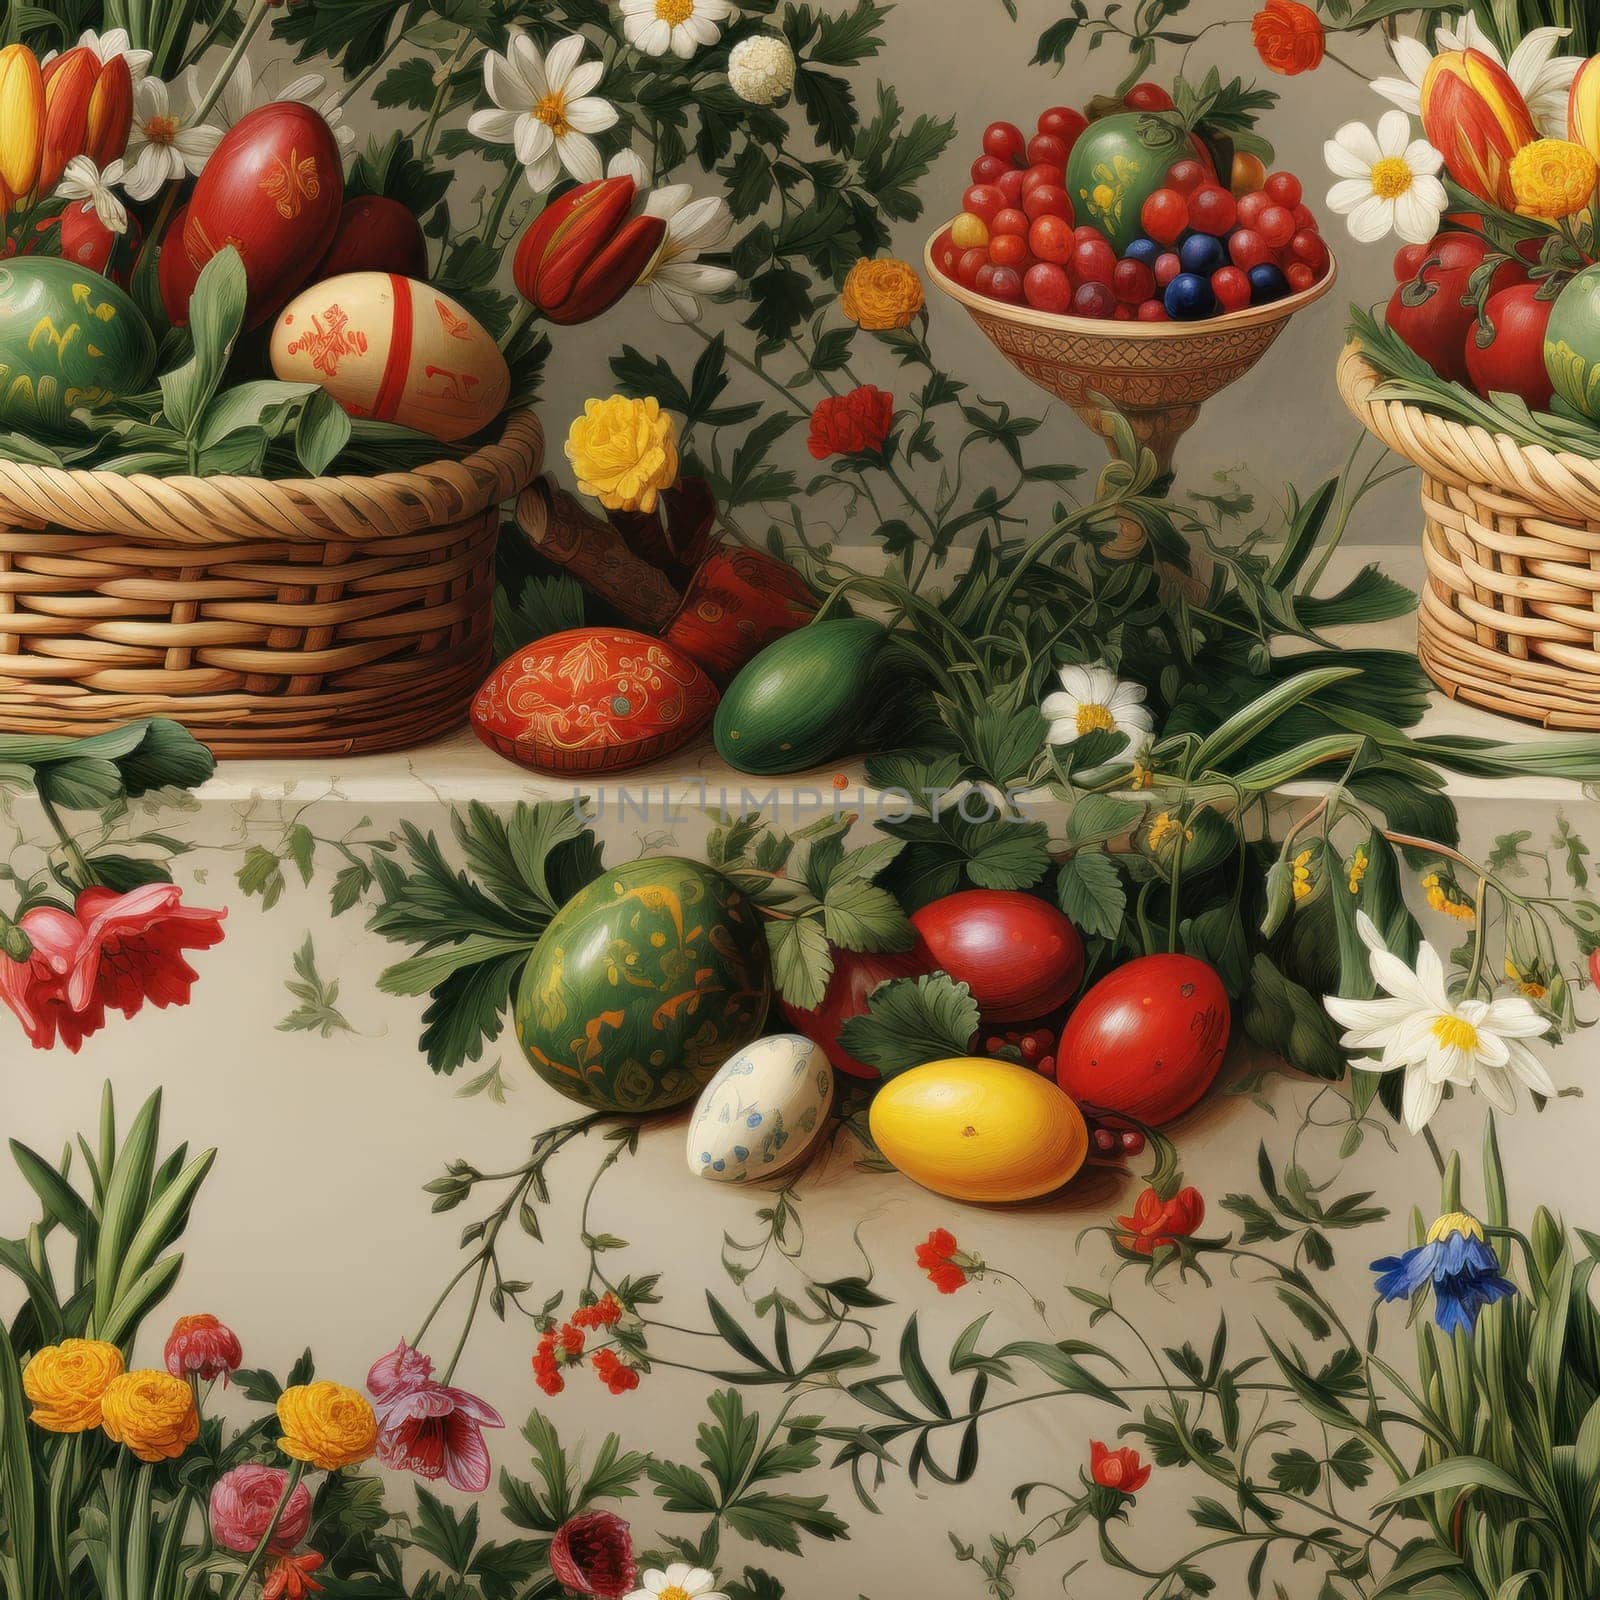 A seamless tile painting of a table with baskets full of flowers and eggs, AI by starush